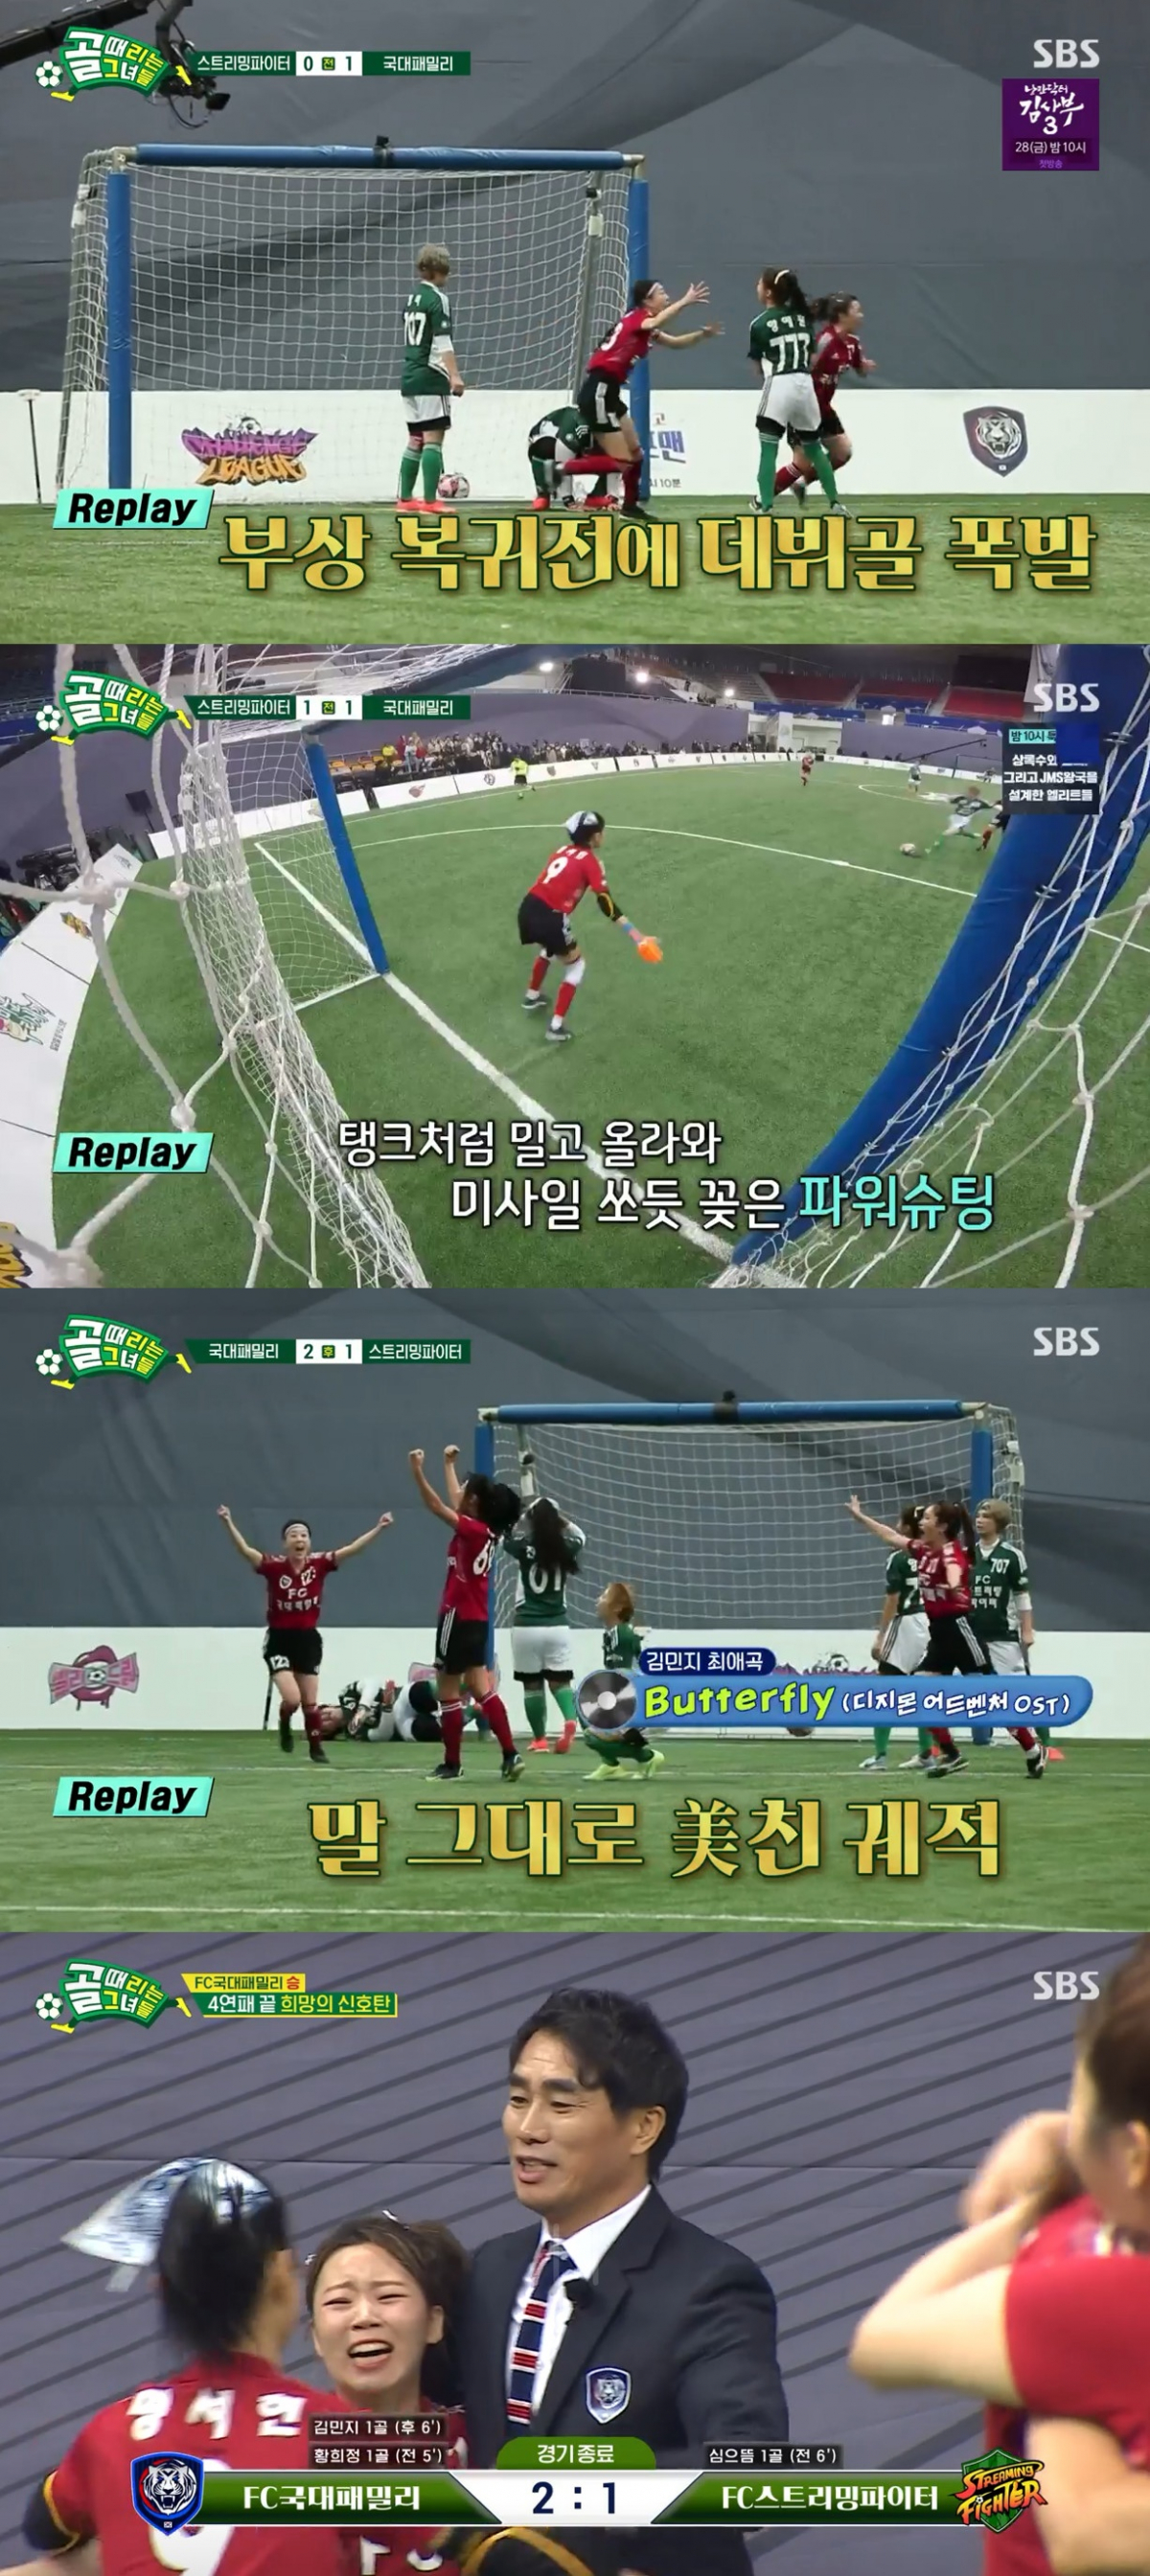 L’équipe nationale de “The Goal Strikers”, victoire 2-1 sur Streaming Fighter…  Heejeong Hwang et Minji Kim